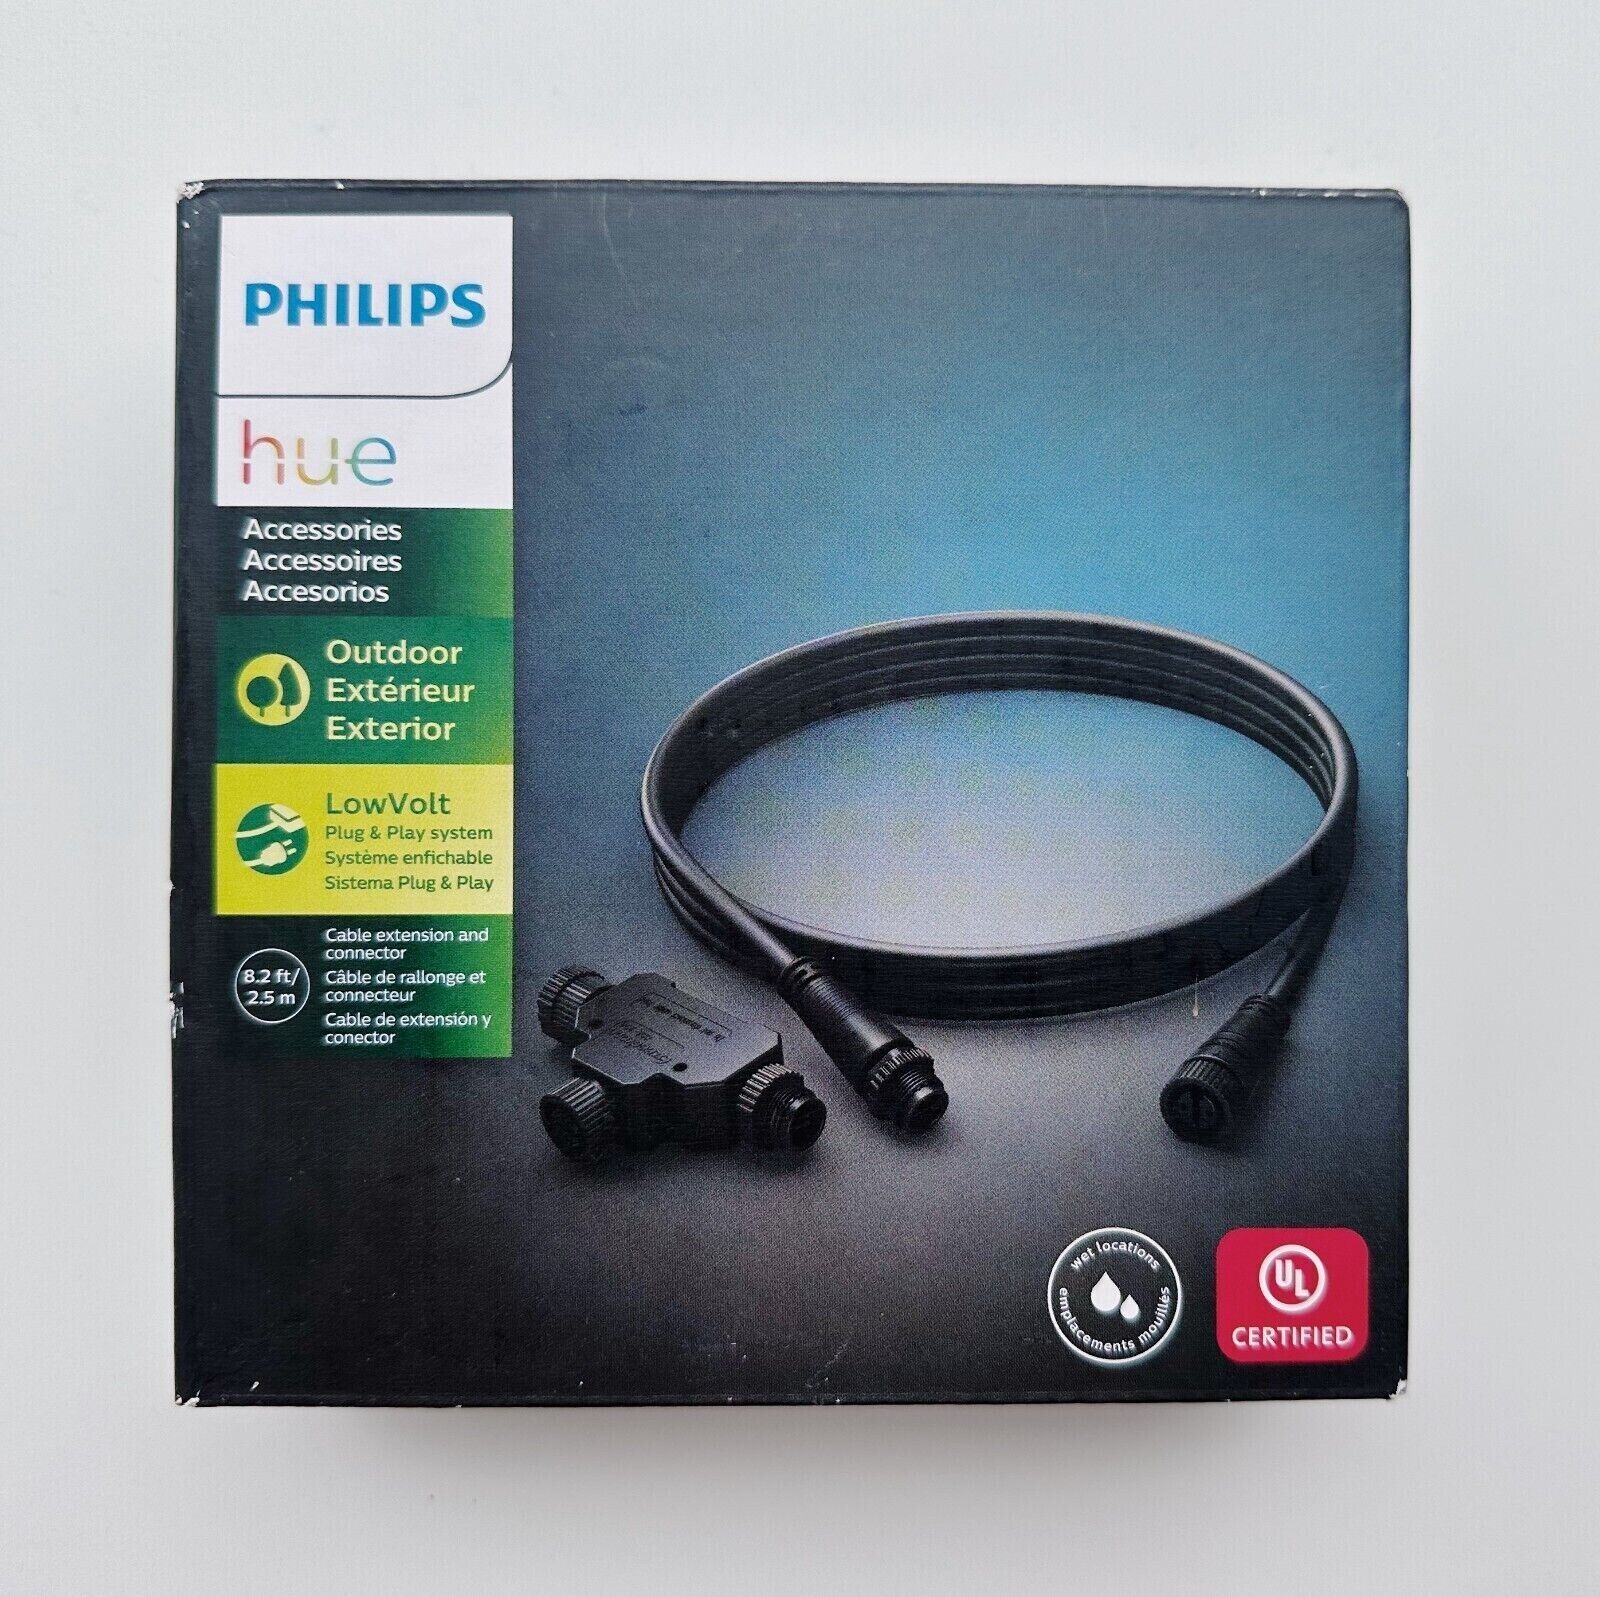 Philips Hue 8ft Cable Connector & T-connector Black NEW